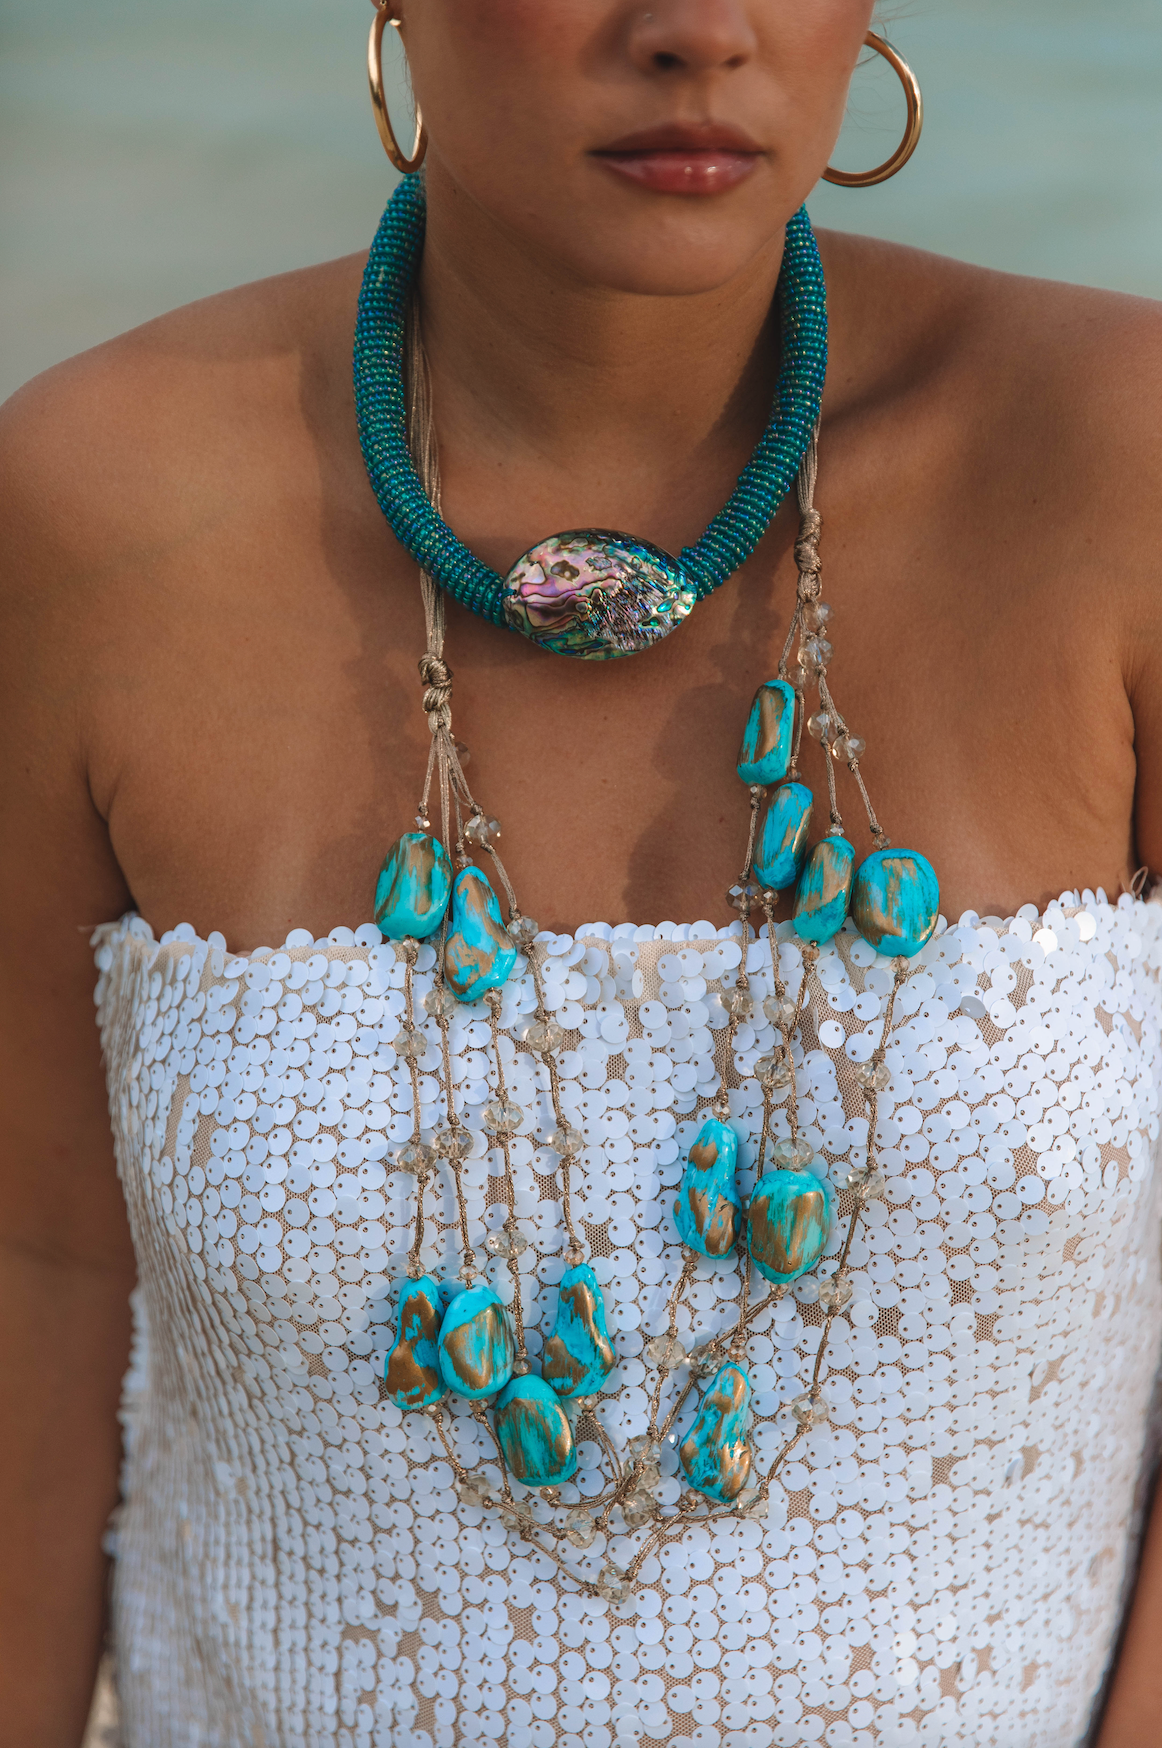 The High Tides Necklace